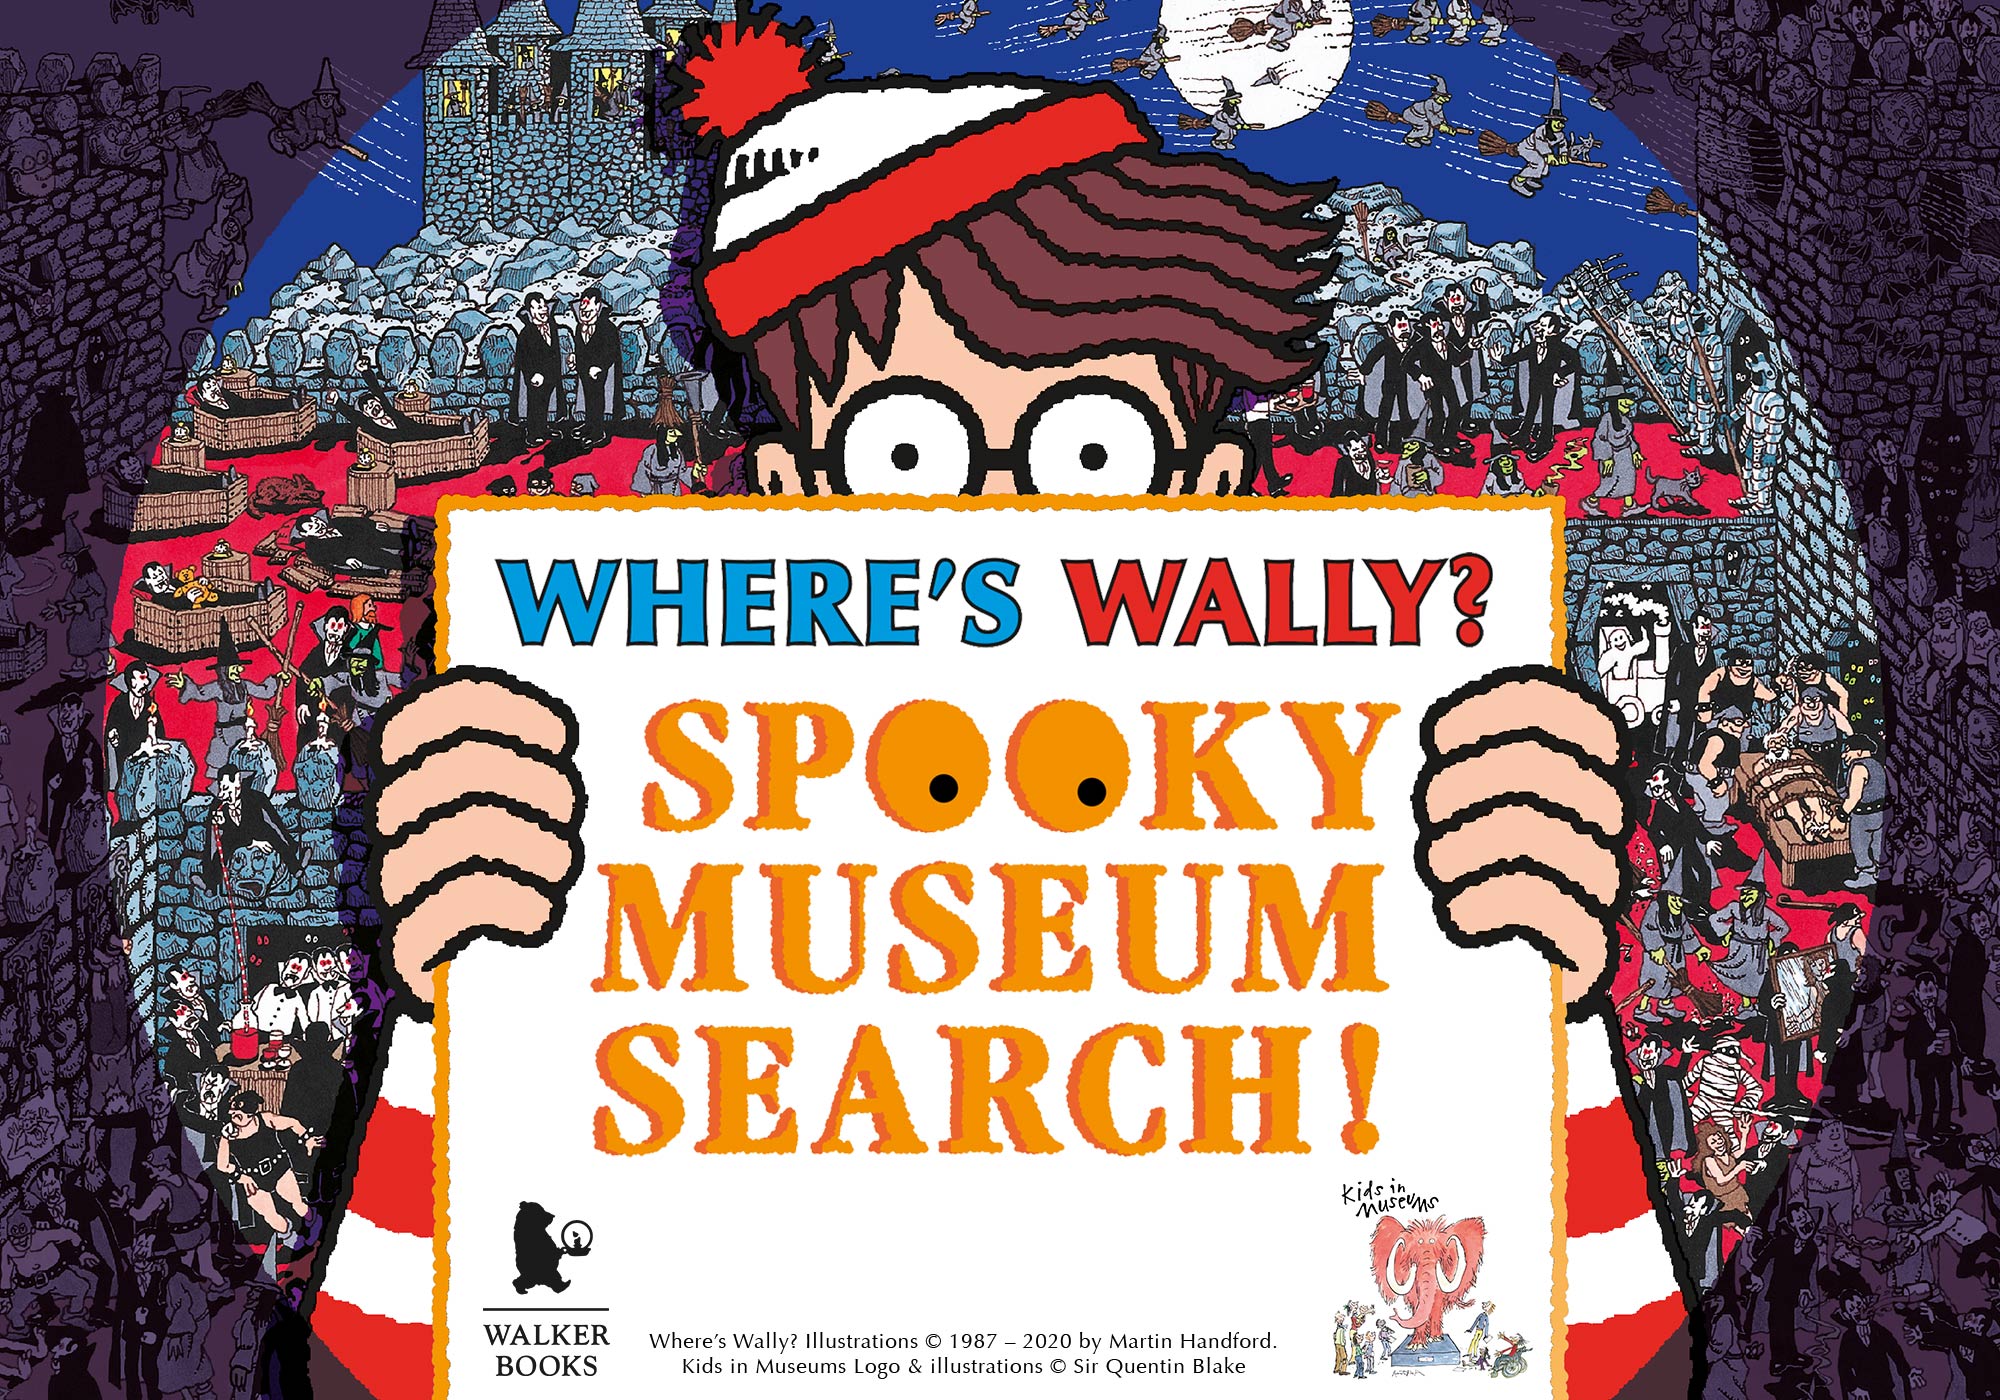 Where’s Wally? Spooky Museum Search – find Wally at the Roman Baths